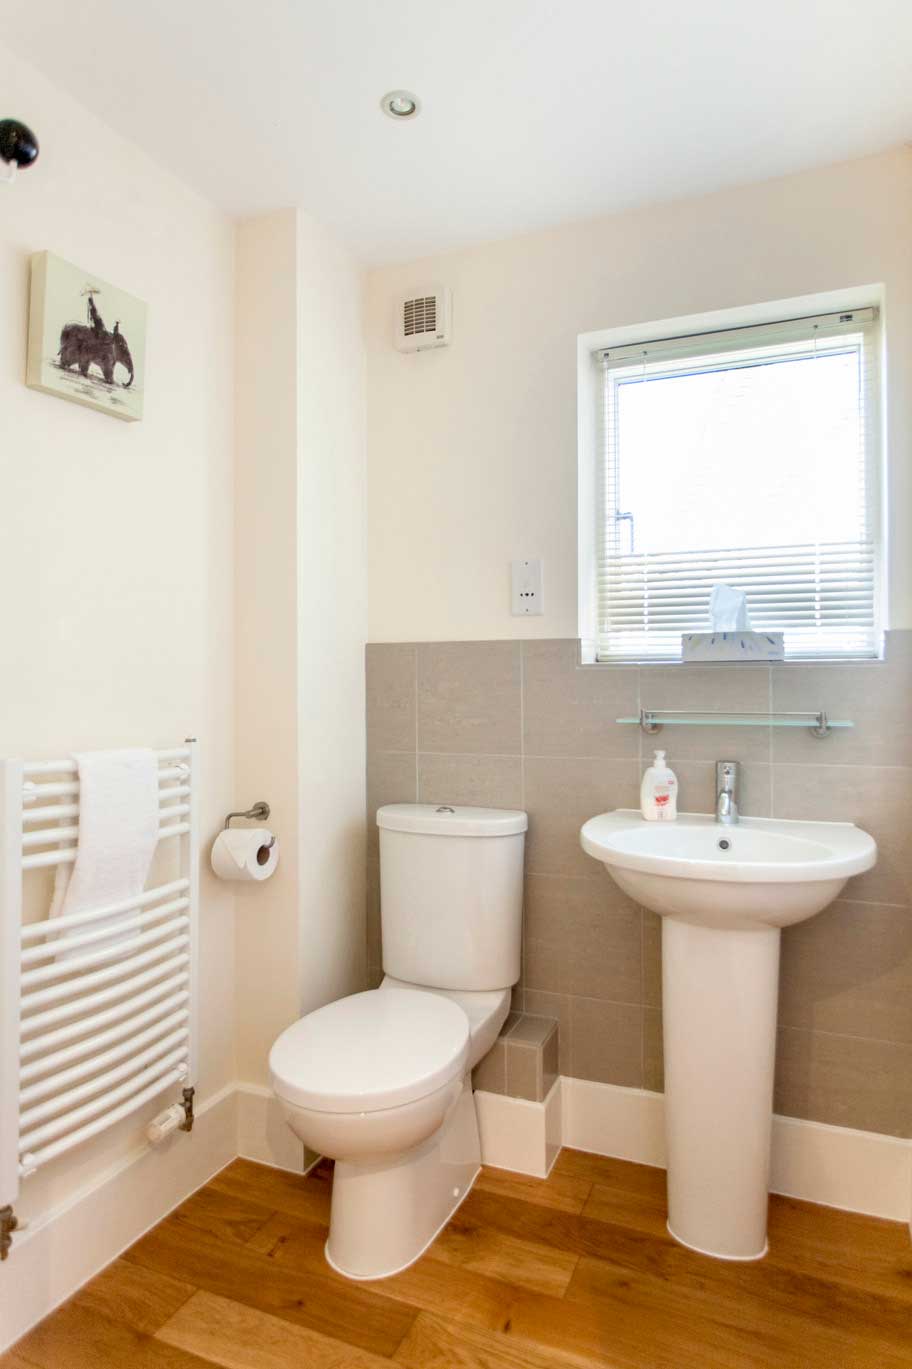 Clearwater 25 - Reeds, Lower Mill Estate – Bathroom